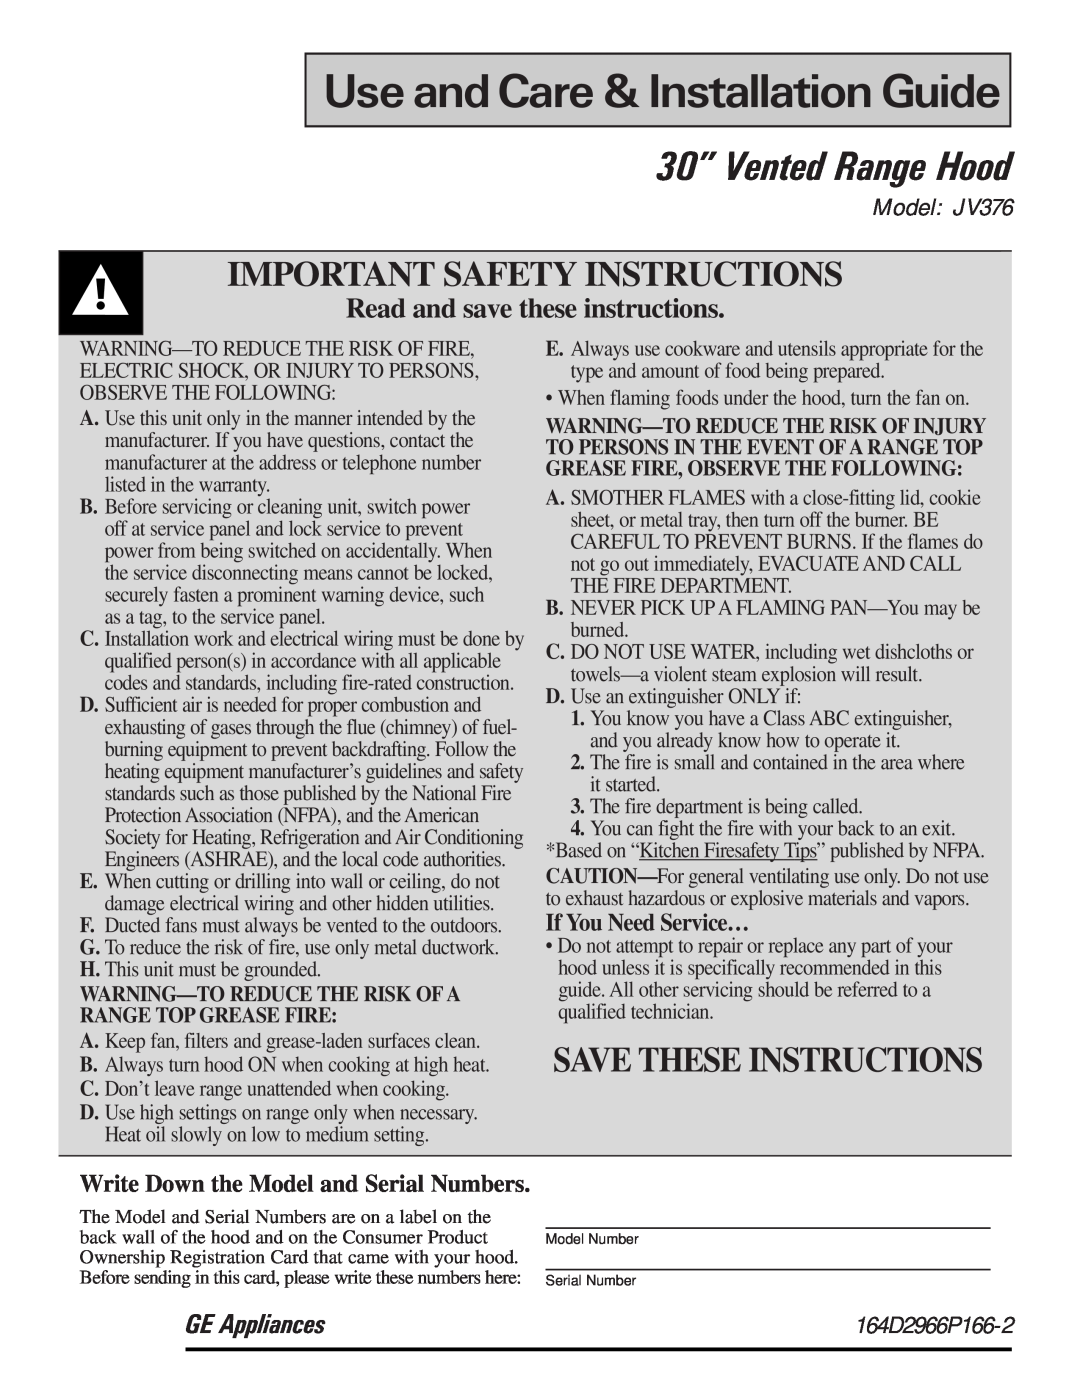 GE JV376 important safety instructions Important Safety Instructions, Save These Instructions, If You Need Service… 